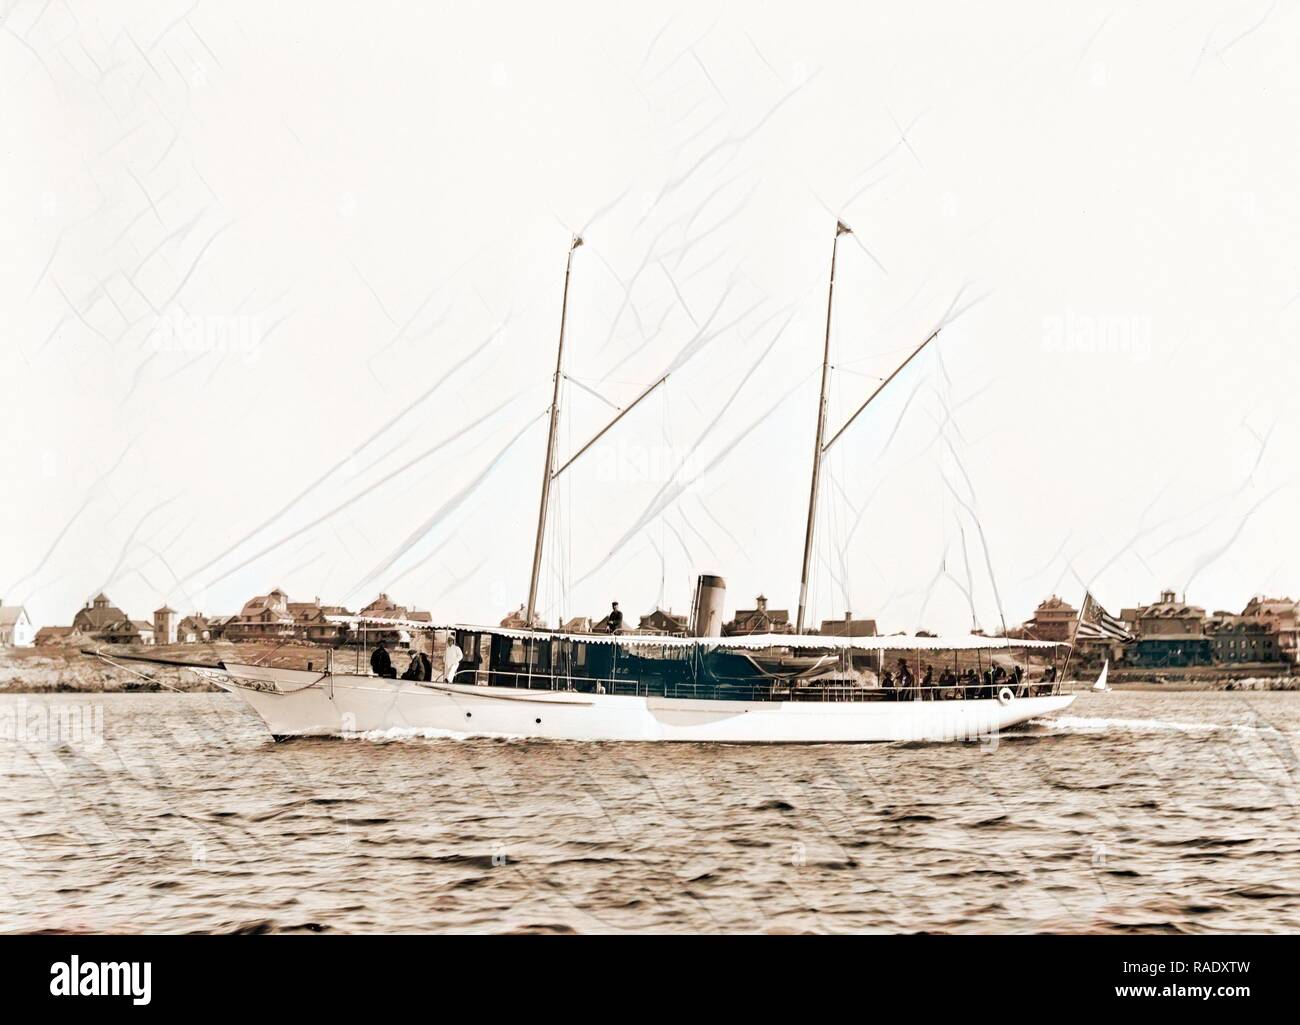 Melissa, Melissa (Steam yacht), Steam yachts, 188. Reimagined by Gibon.  Classic art with a modern twist reimagined Stock Photo - Alamy